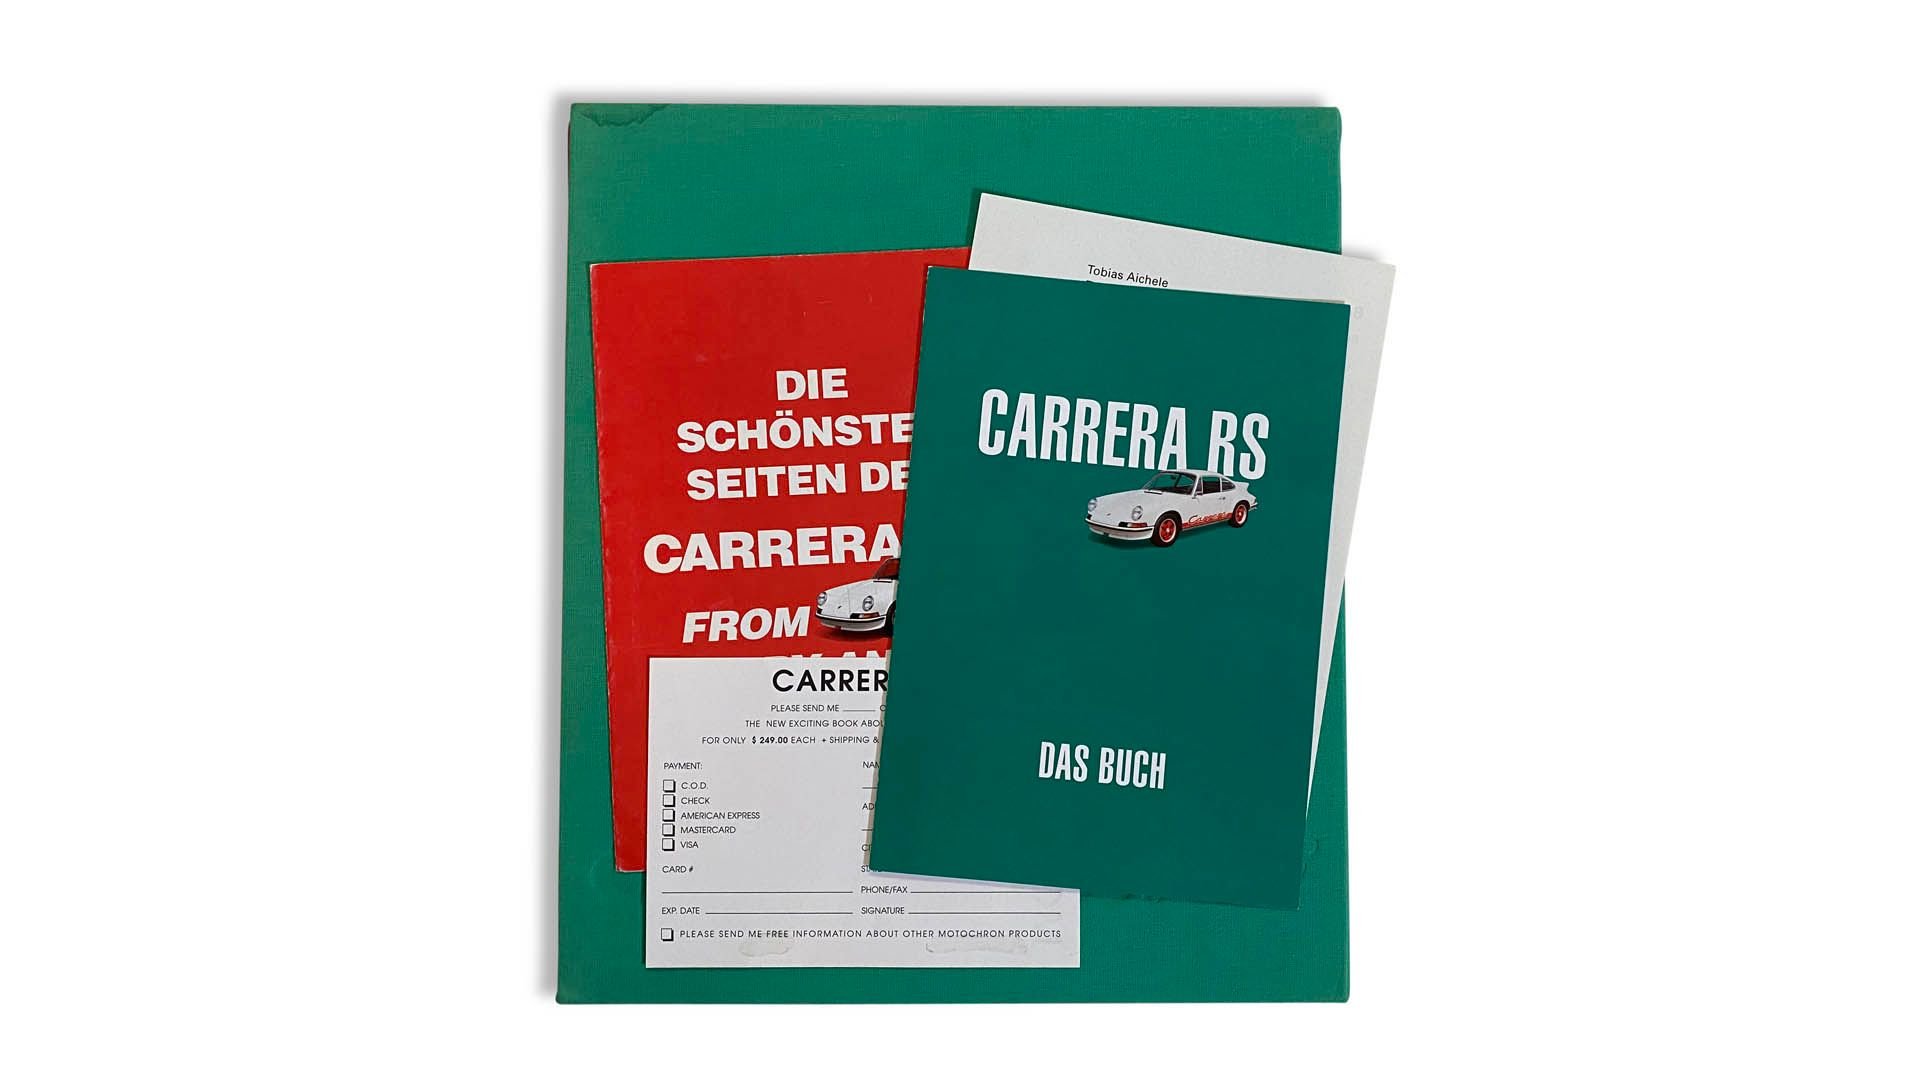 Carrera rs das buch first edition english 1992 including all three marketing pieces